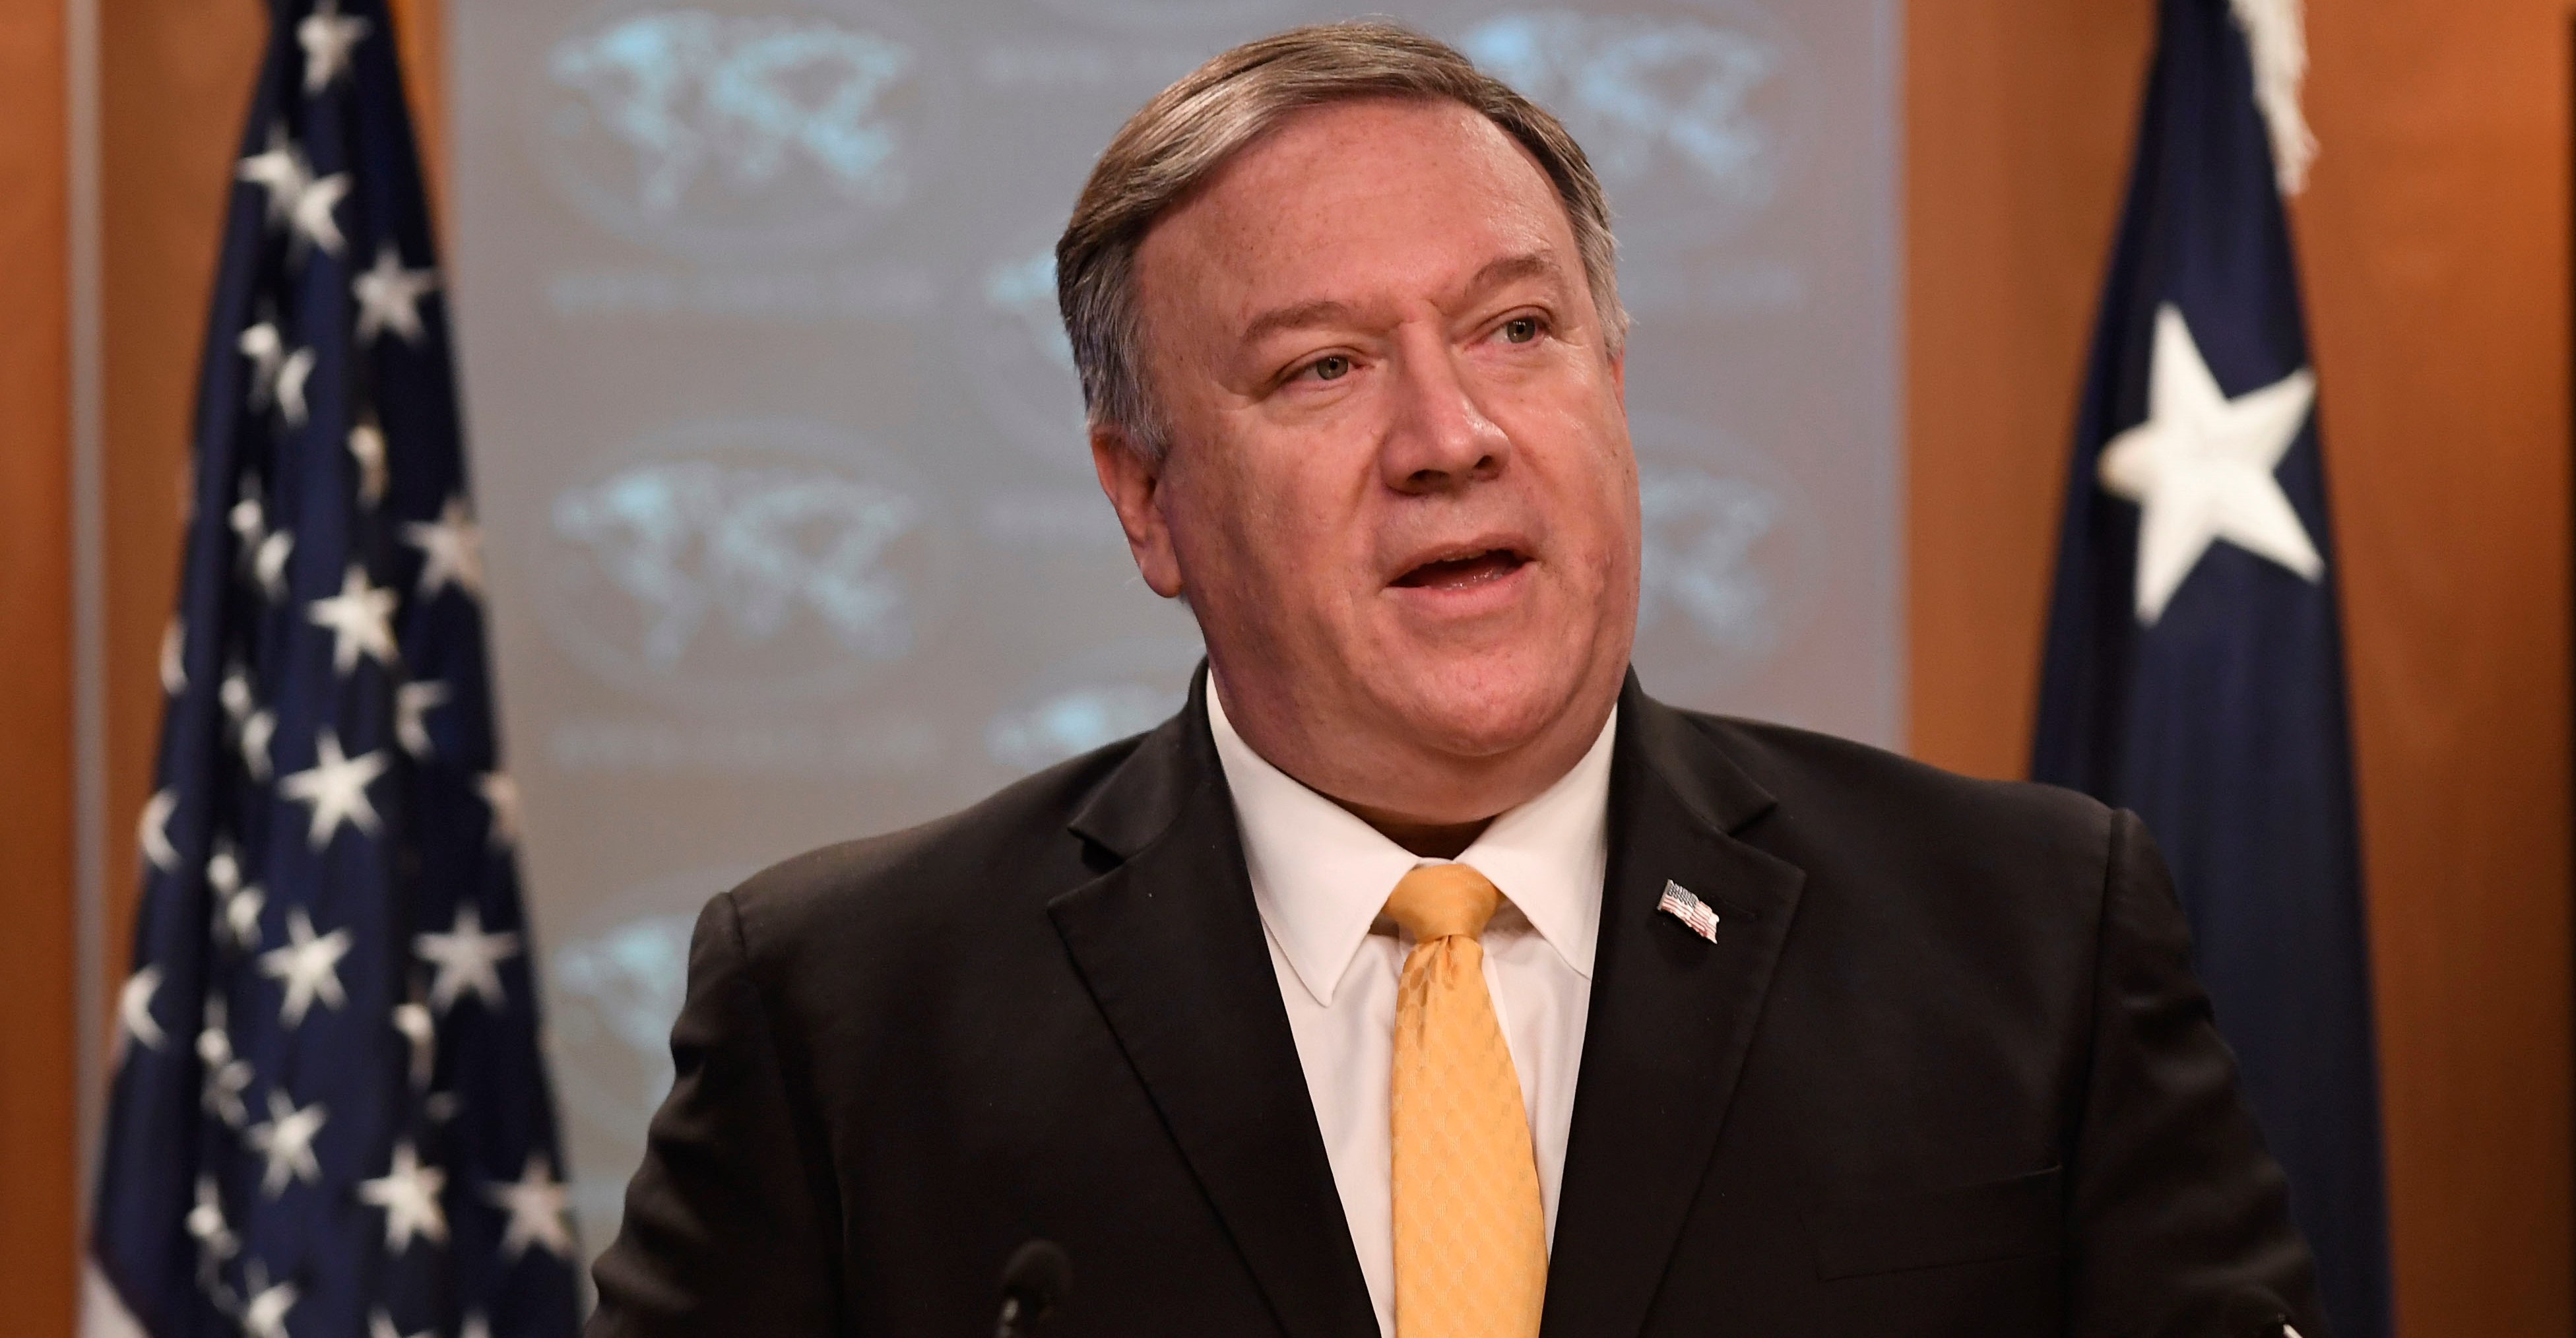 In apparent swipe at China, Pompeo calls for transparency in coronavirus fight